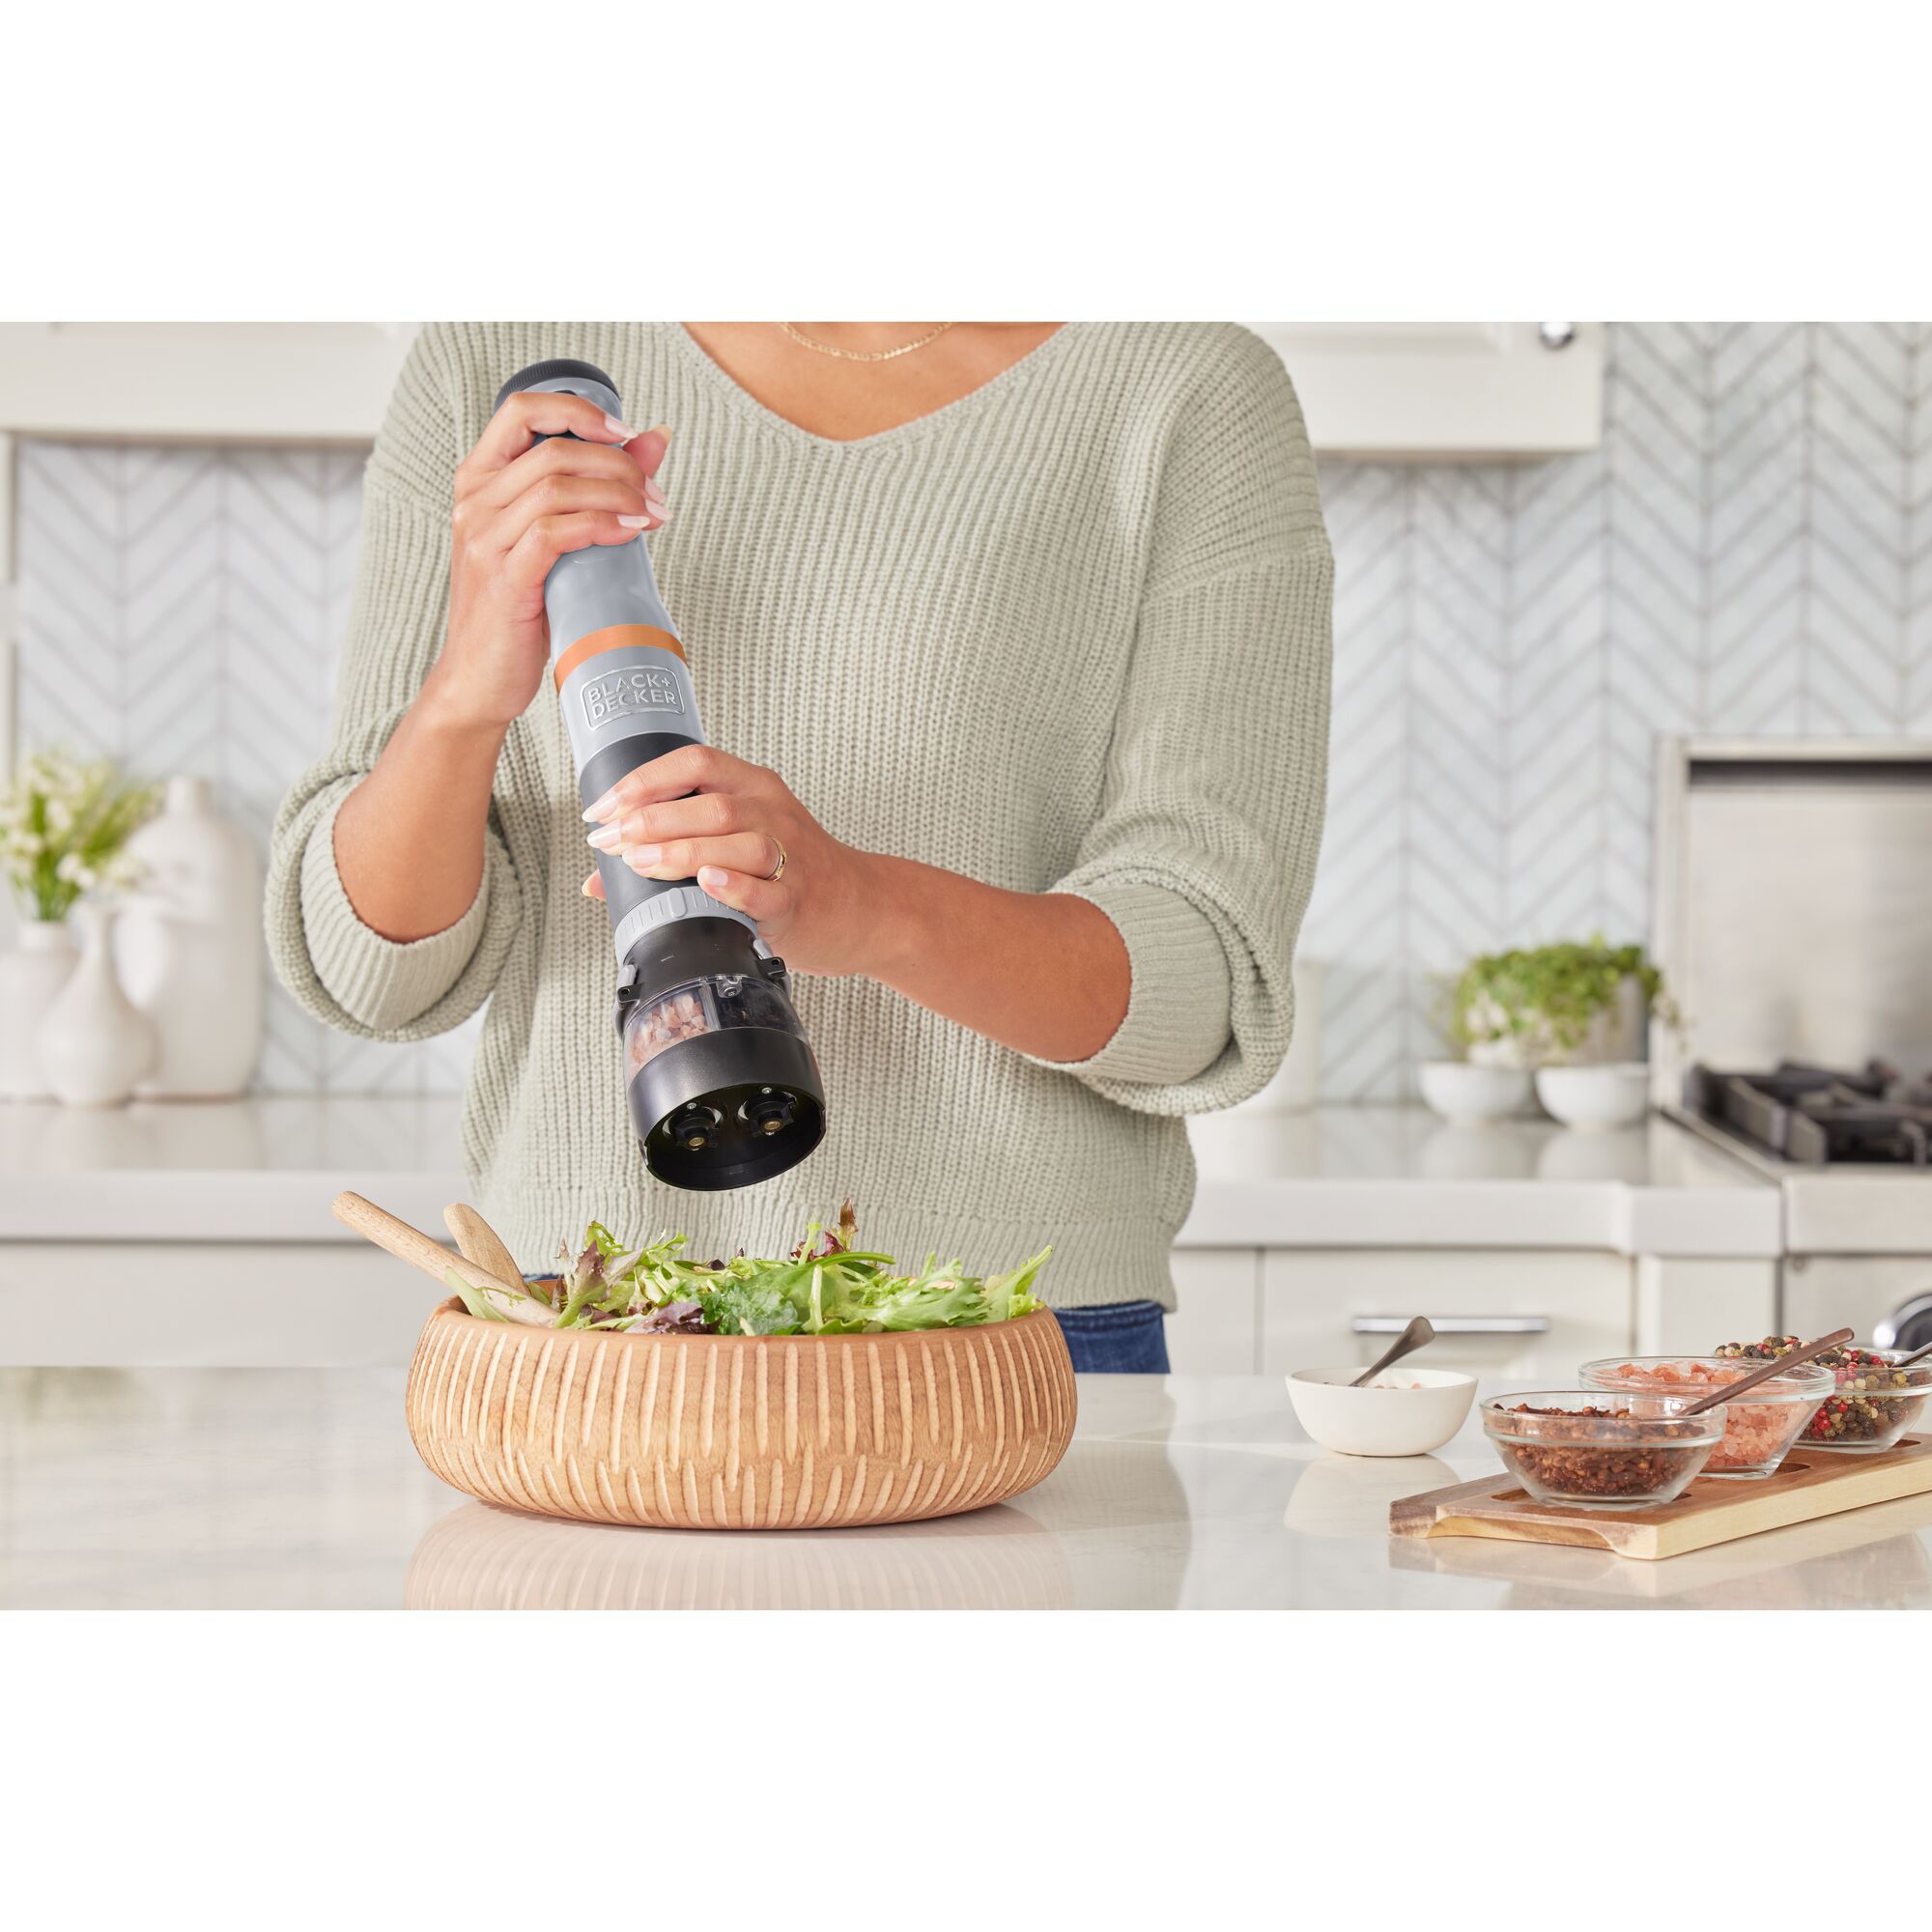 Talent using the grey BLACK+DECKER kitchen wand spice grinder attachment to add spices to a salad